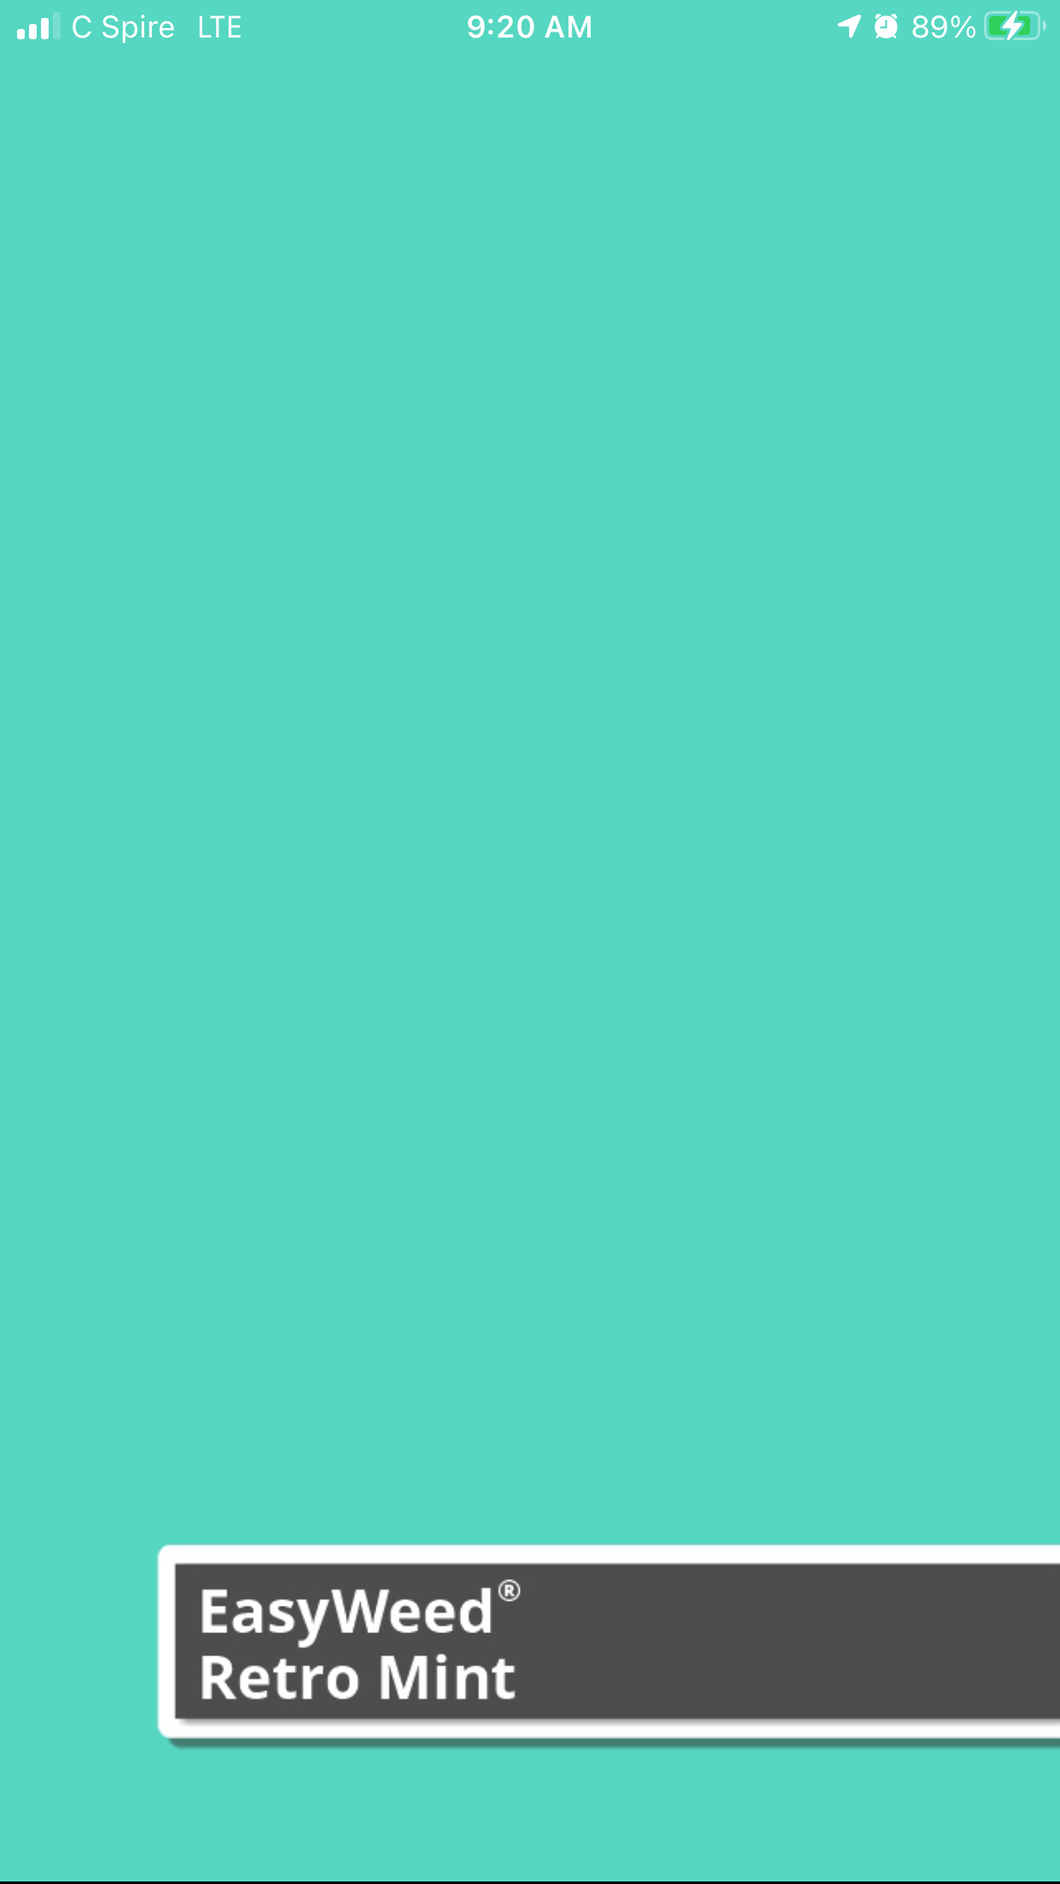 Siser Easyweed (Retro Mint Opaque back)